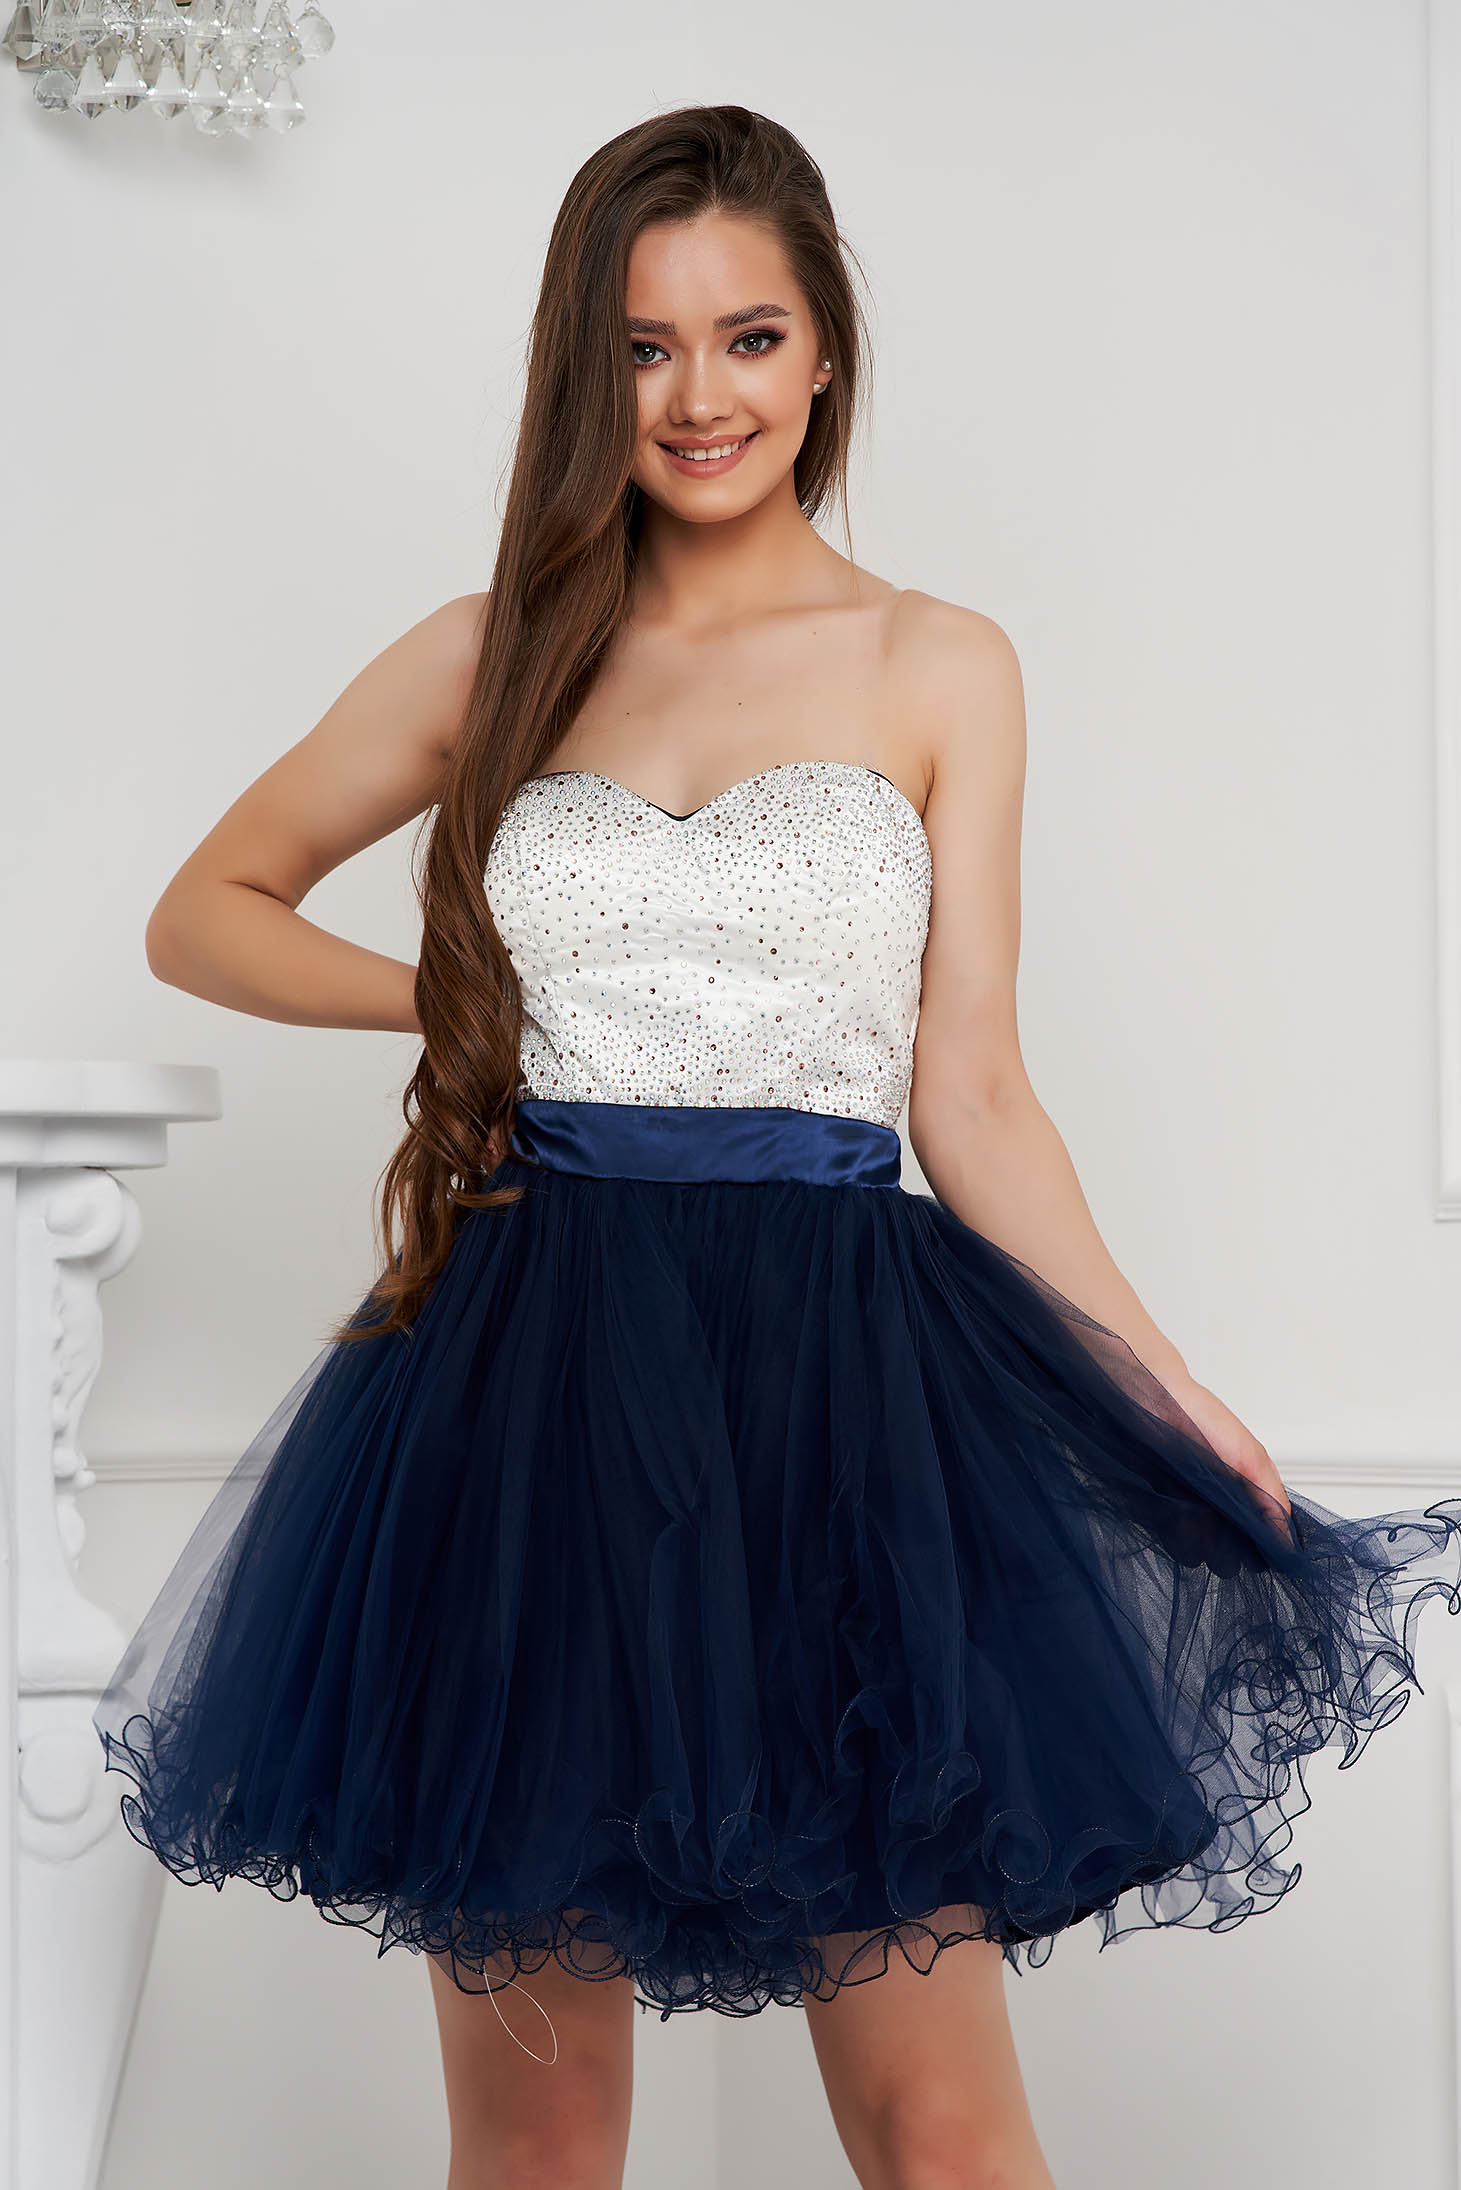 Darkblue dress short cut occasional cloche with crystal embellished details from tulle